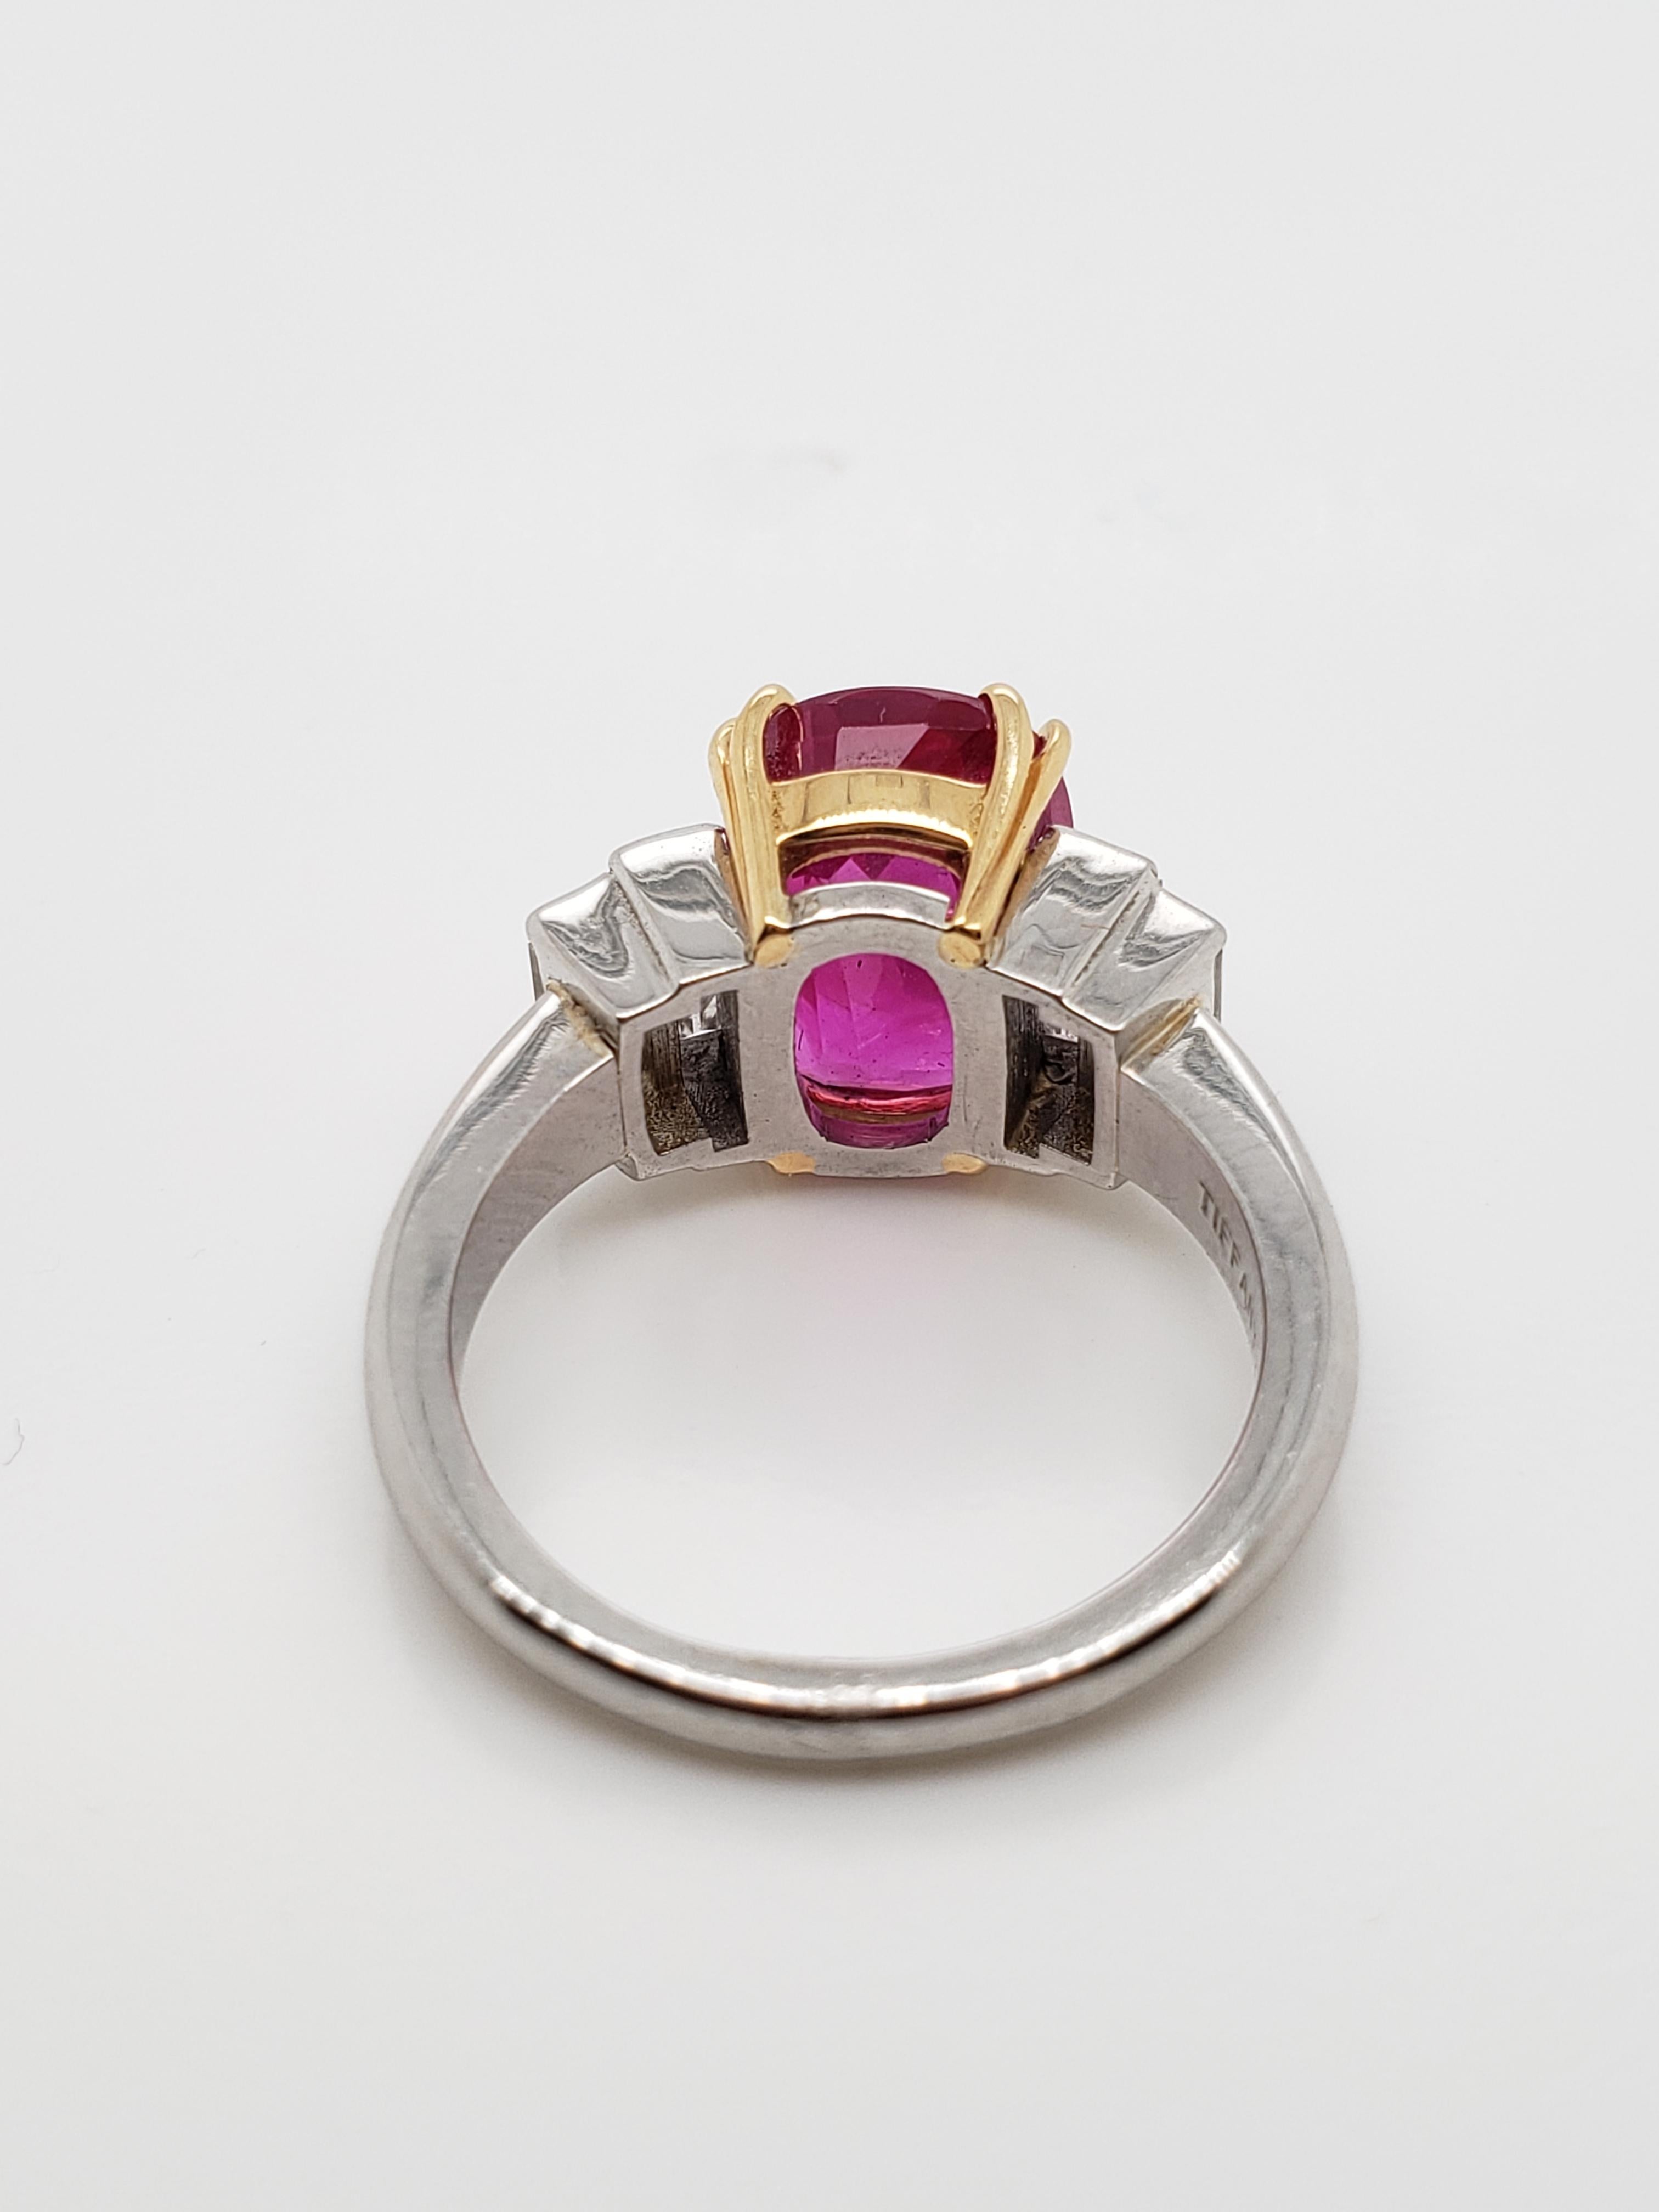 Tiffany & Co. AGL Certified 4.02 Ruby  Diamond Ring, In Good Condition For Sale In New York, NY